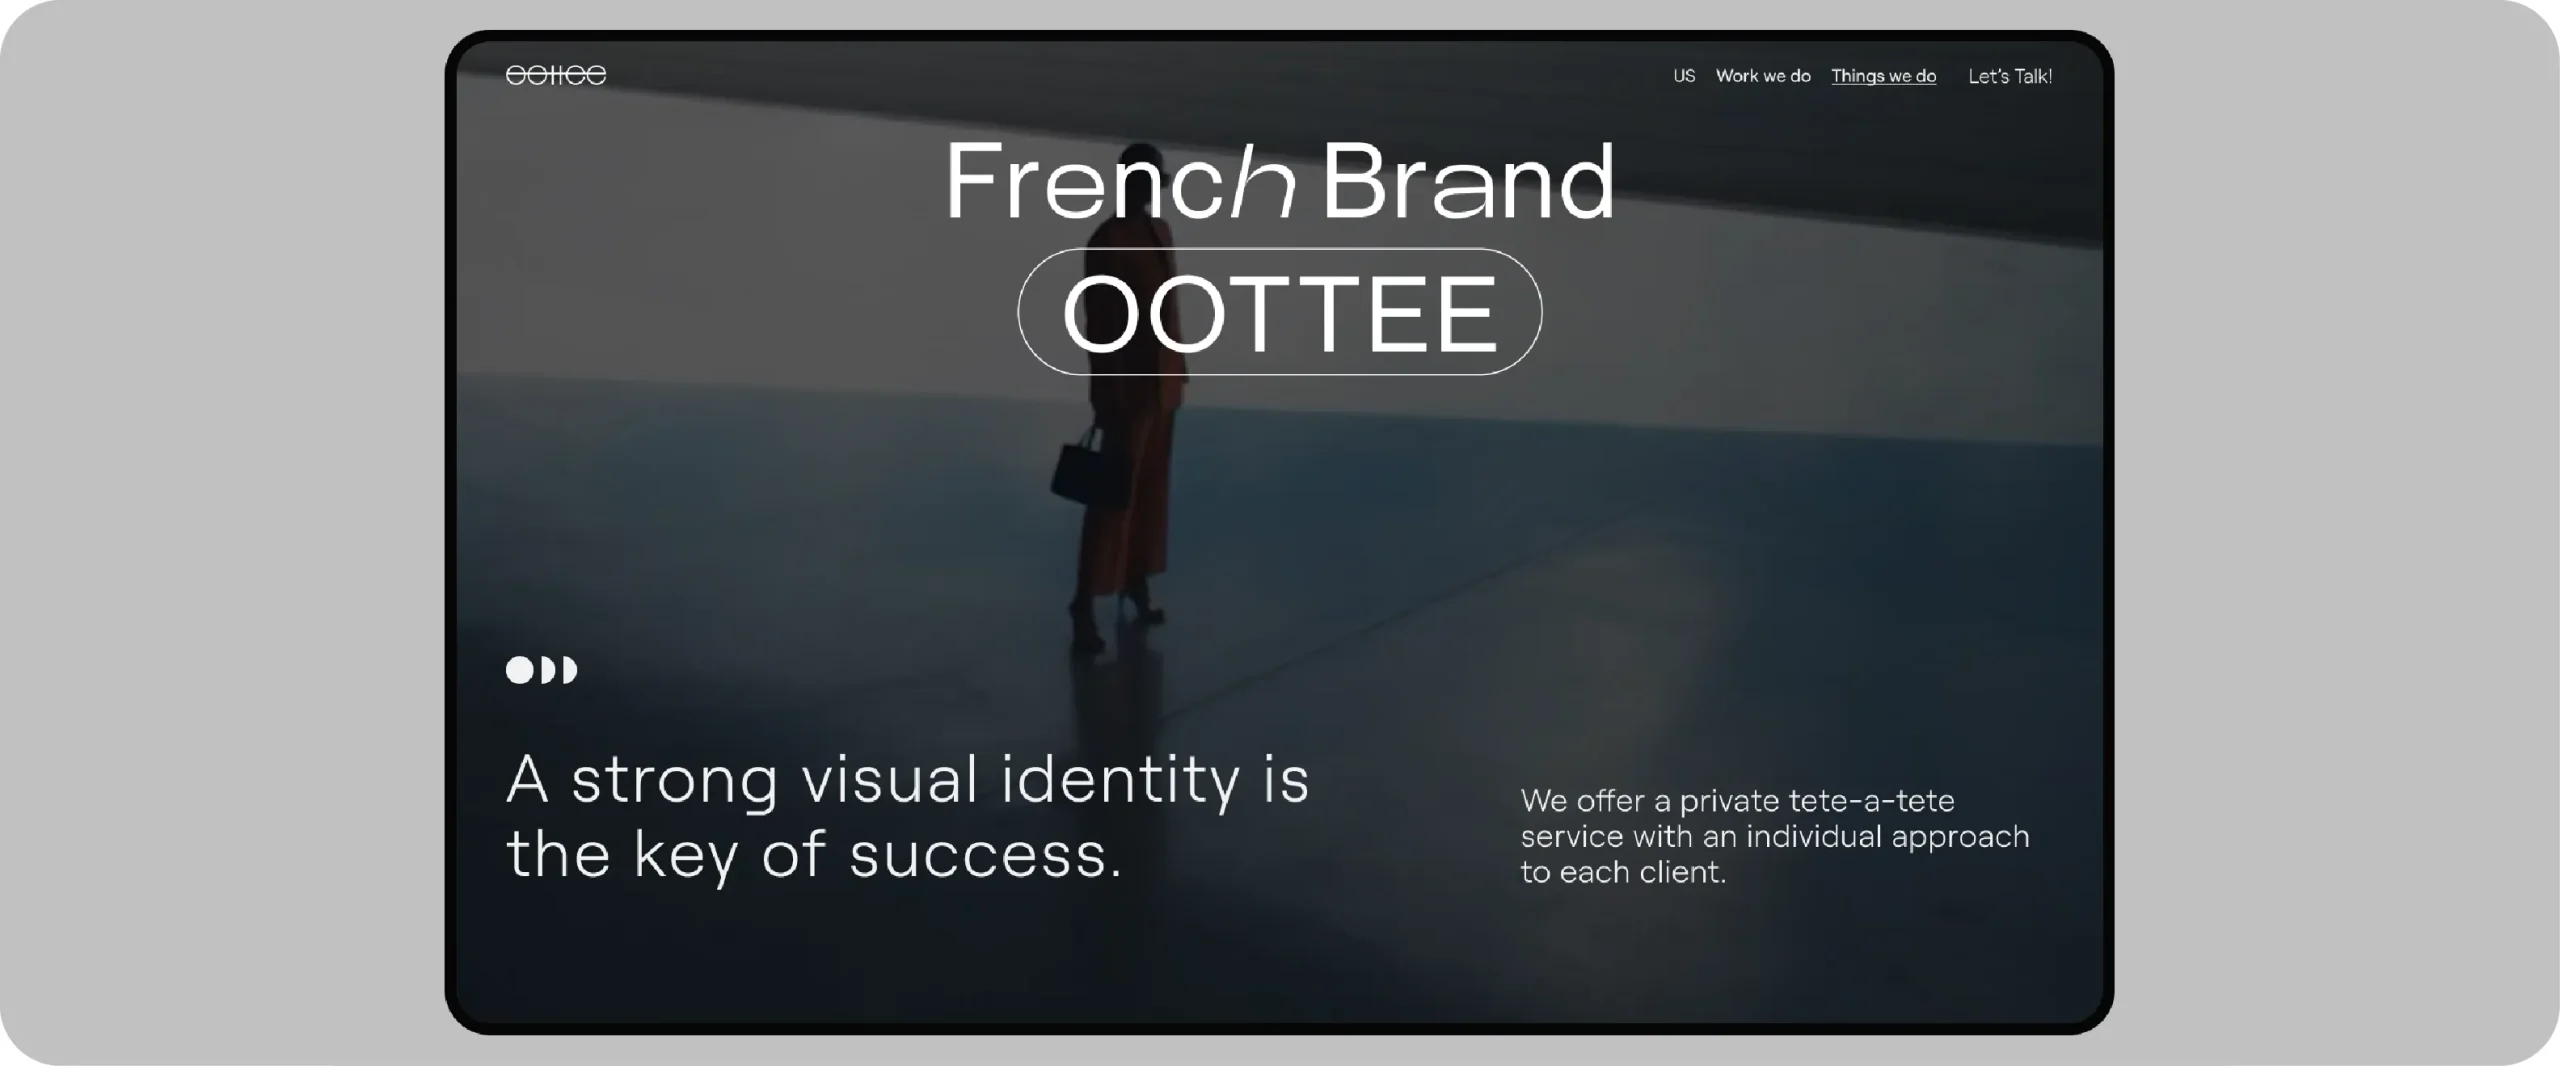 Oottee French Brand